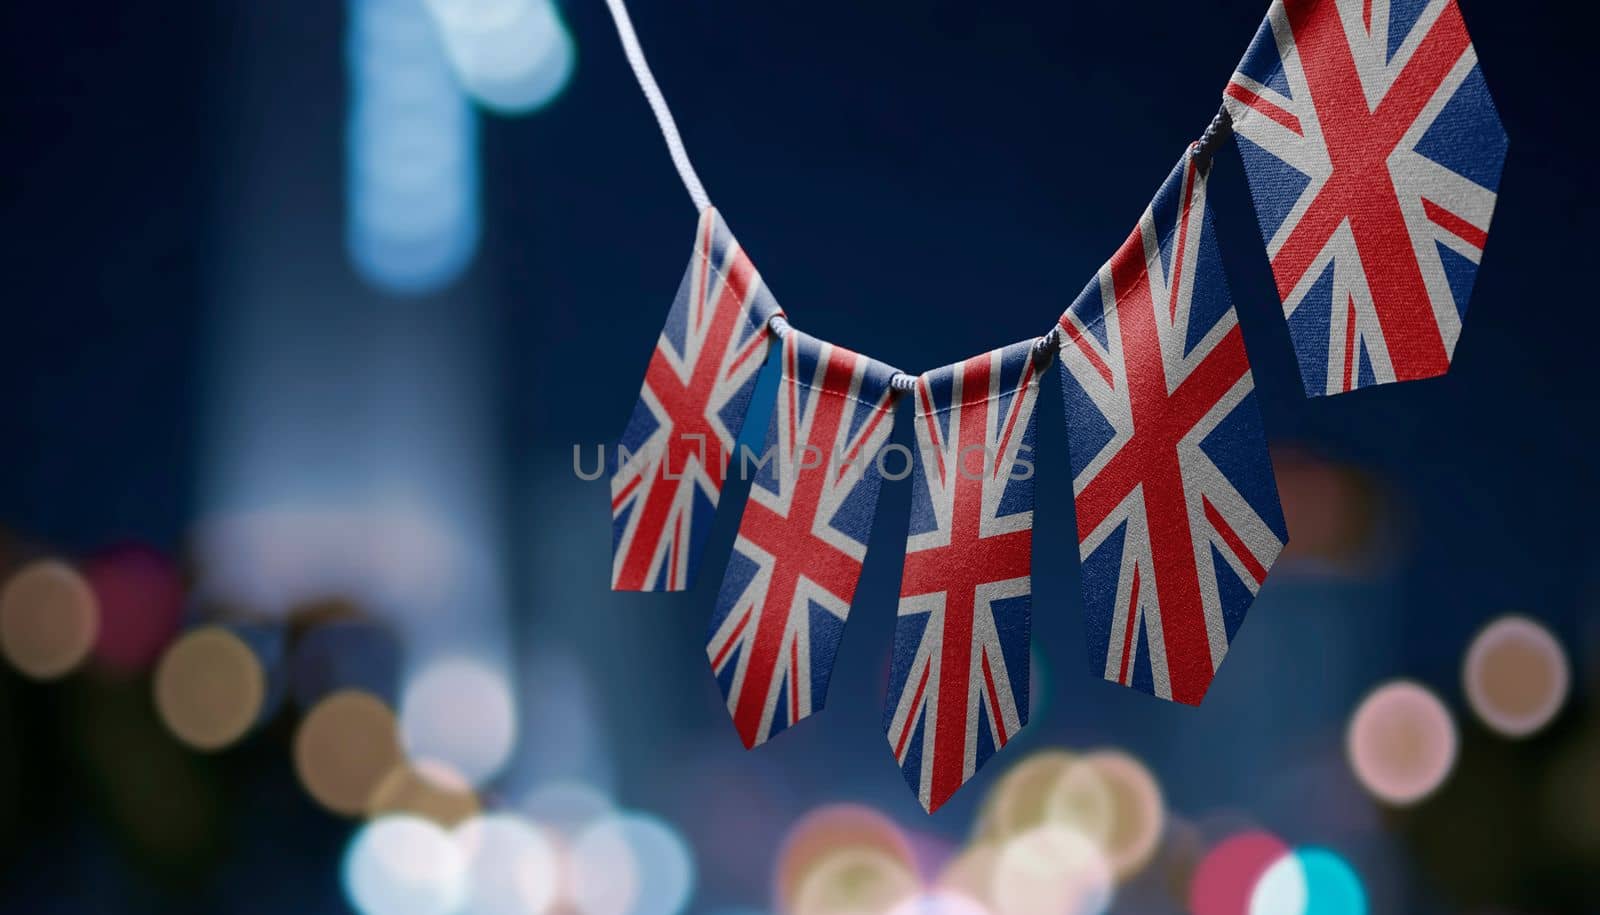 A garland of United Kingdom national flags on an abstract blurred background by butenkow